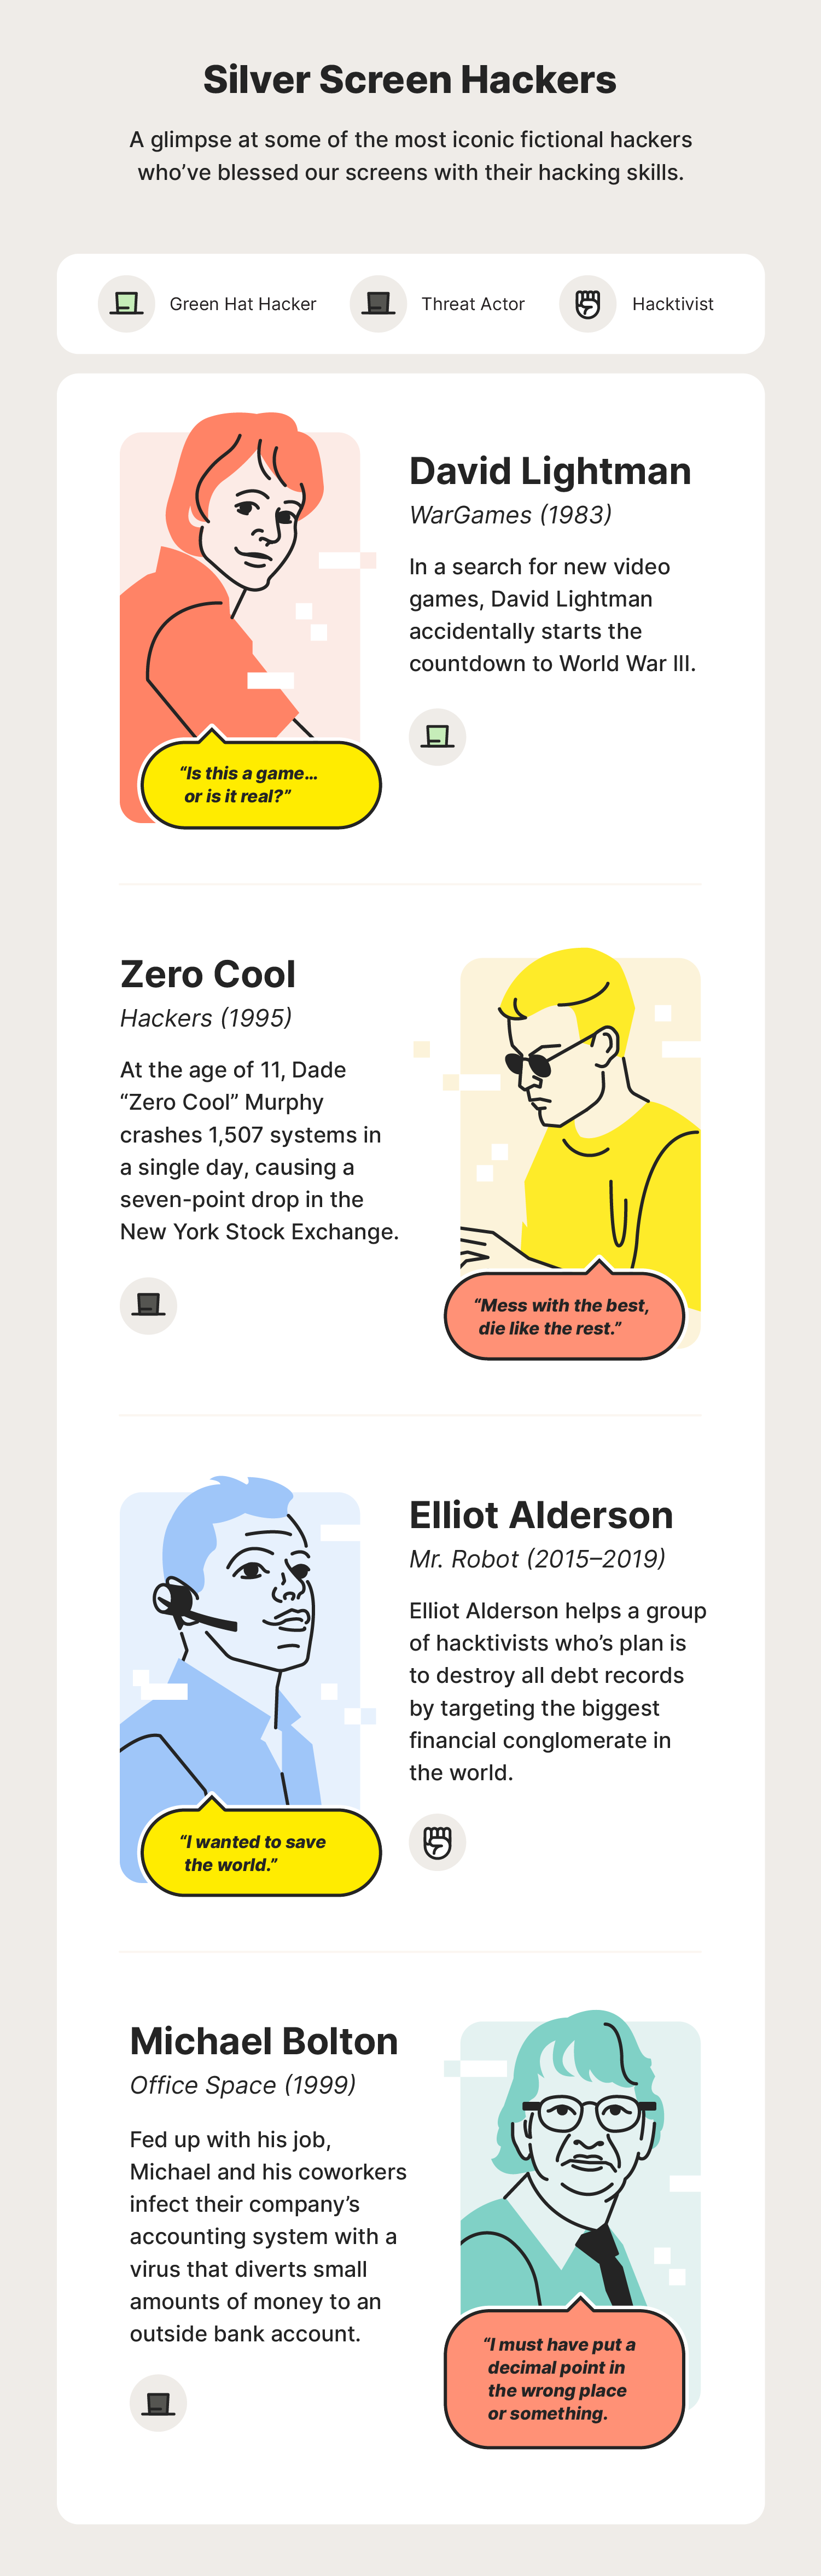 A graphic highlights hackers from famous movies and TV shows, helping answer the question, “What is a hacker?”